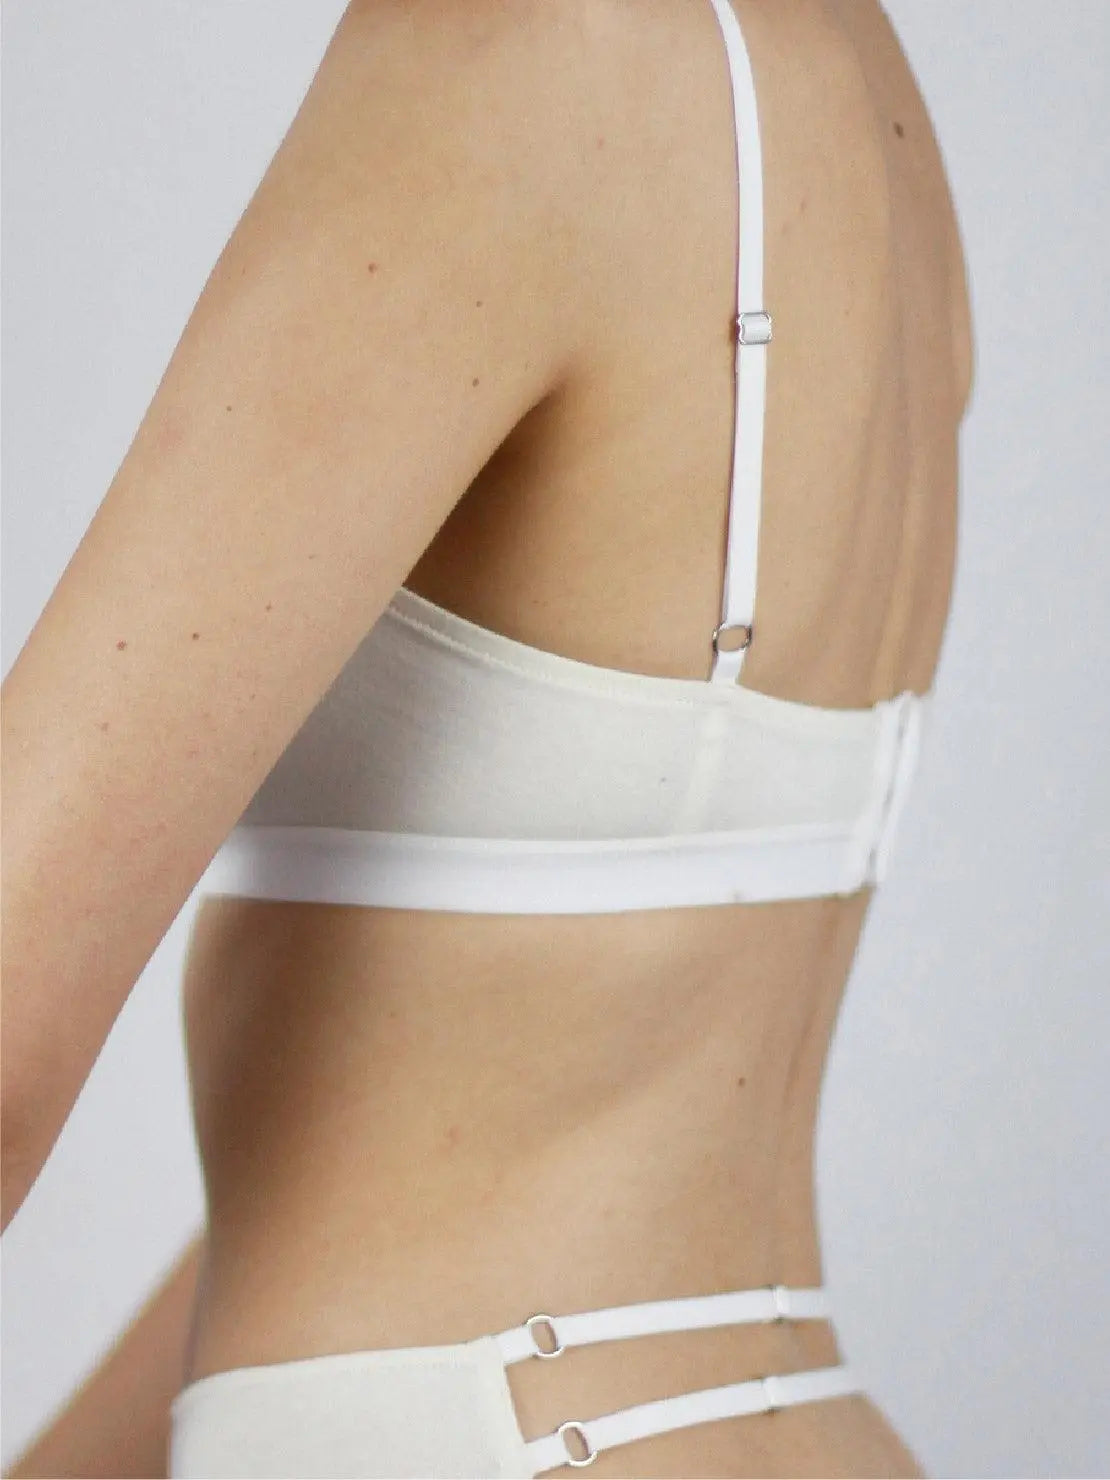 A person is wearing a white, minimalist Ecru Bandeau Organic Cotton Bra - Talk Under Light with thin straps. The image focuses on the upper torso, revealing the bra's simple and clean design. The background is a plain light grey, enhancing the focus on the Ecru Bandeau Organic Cotton Bra - Talk Under Light, available exclusively at BassalStore Barcelona.